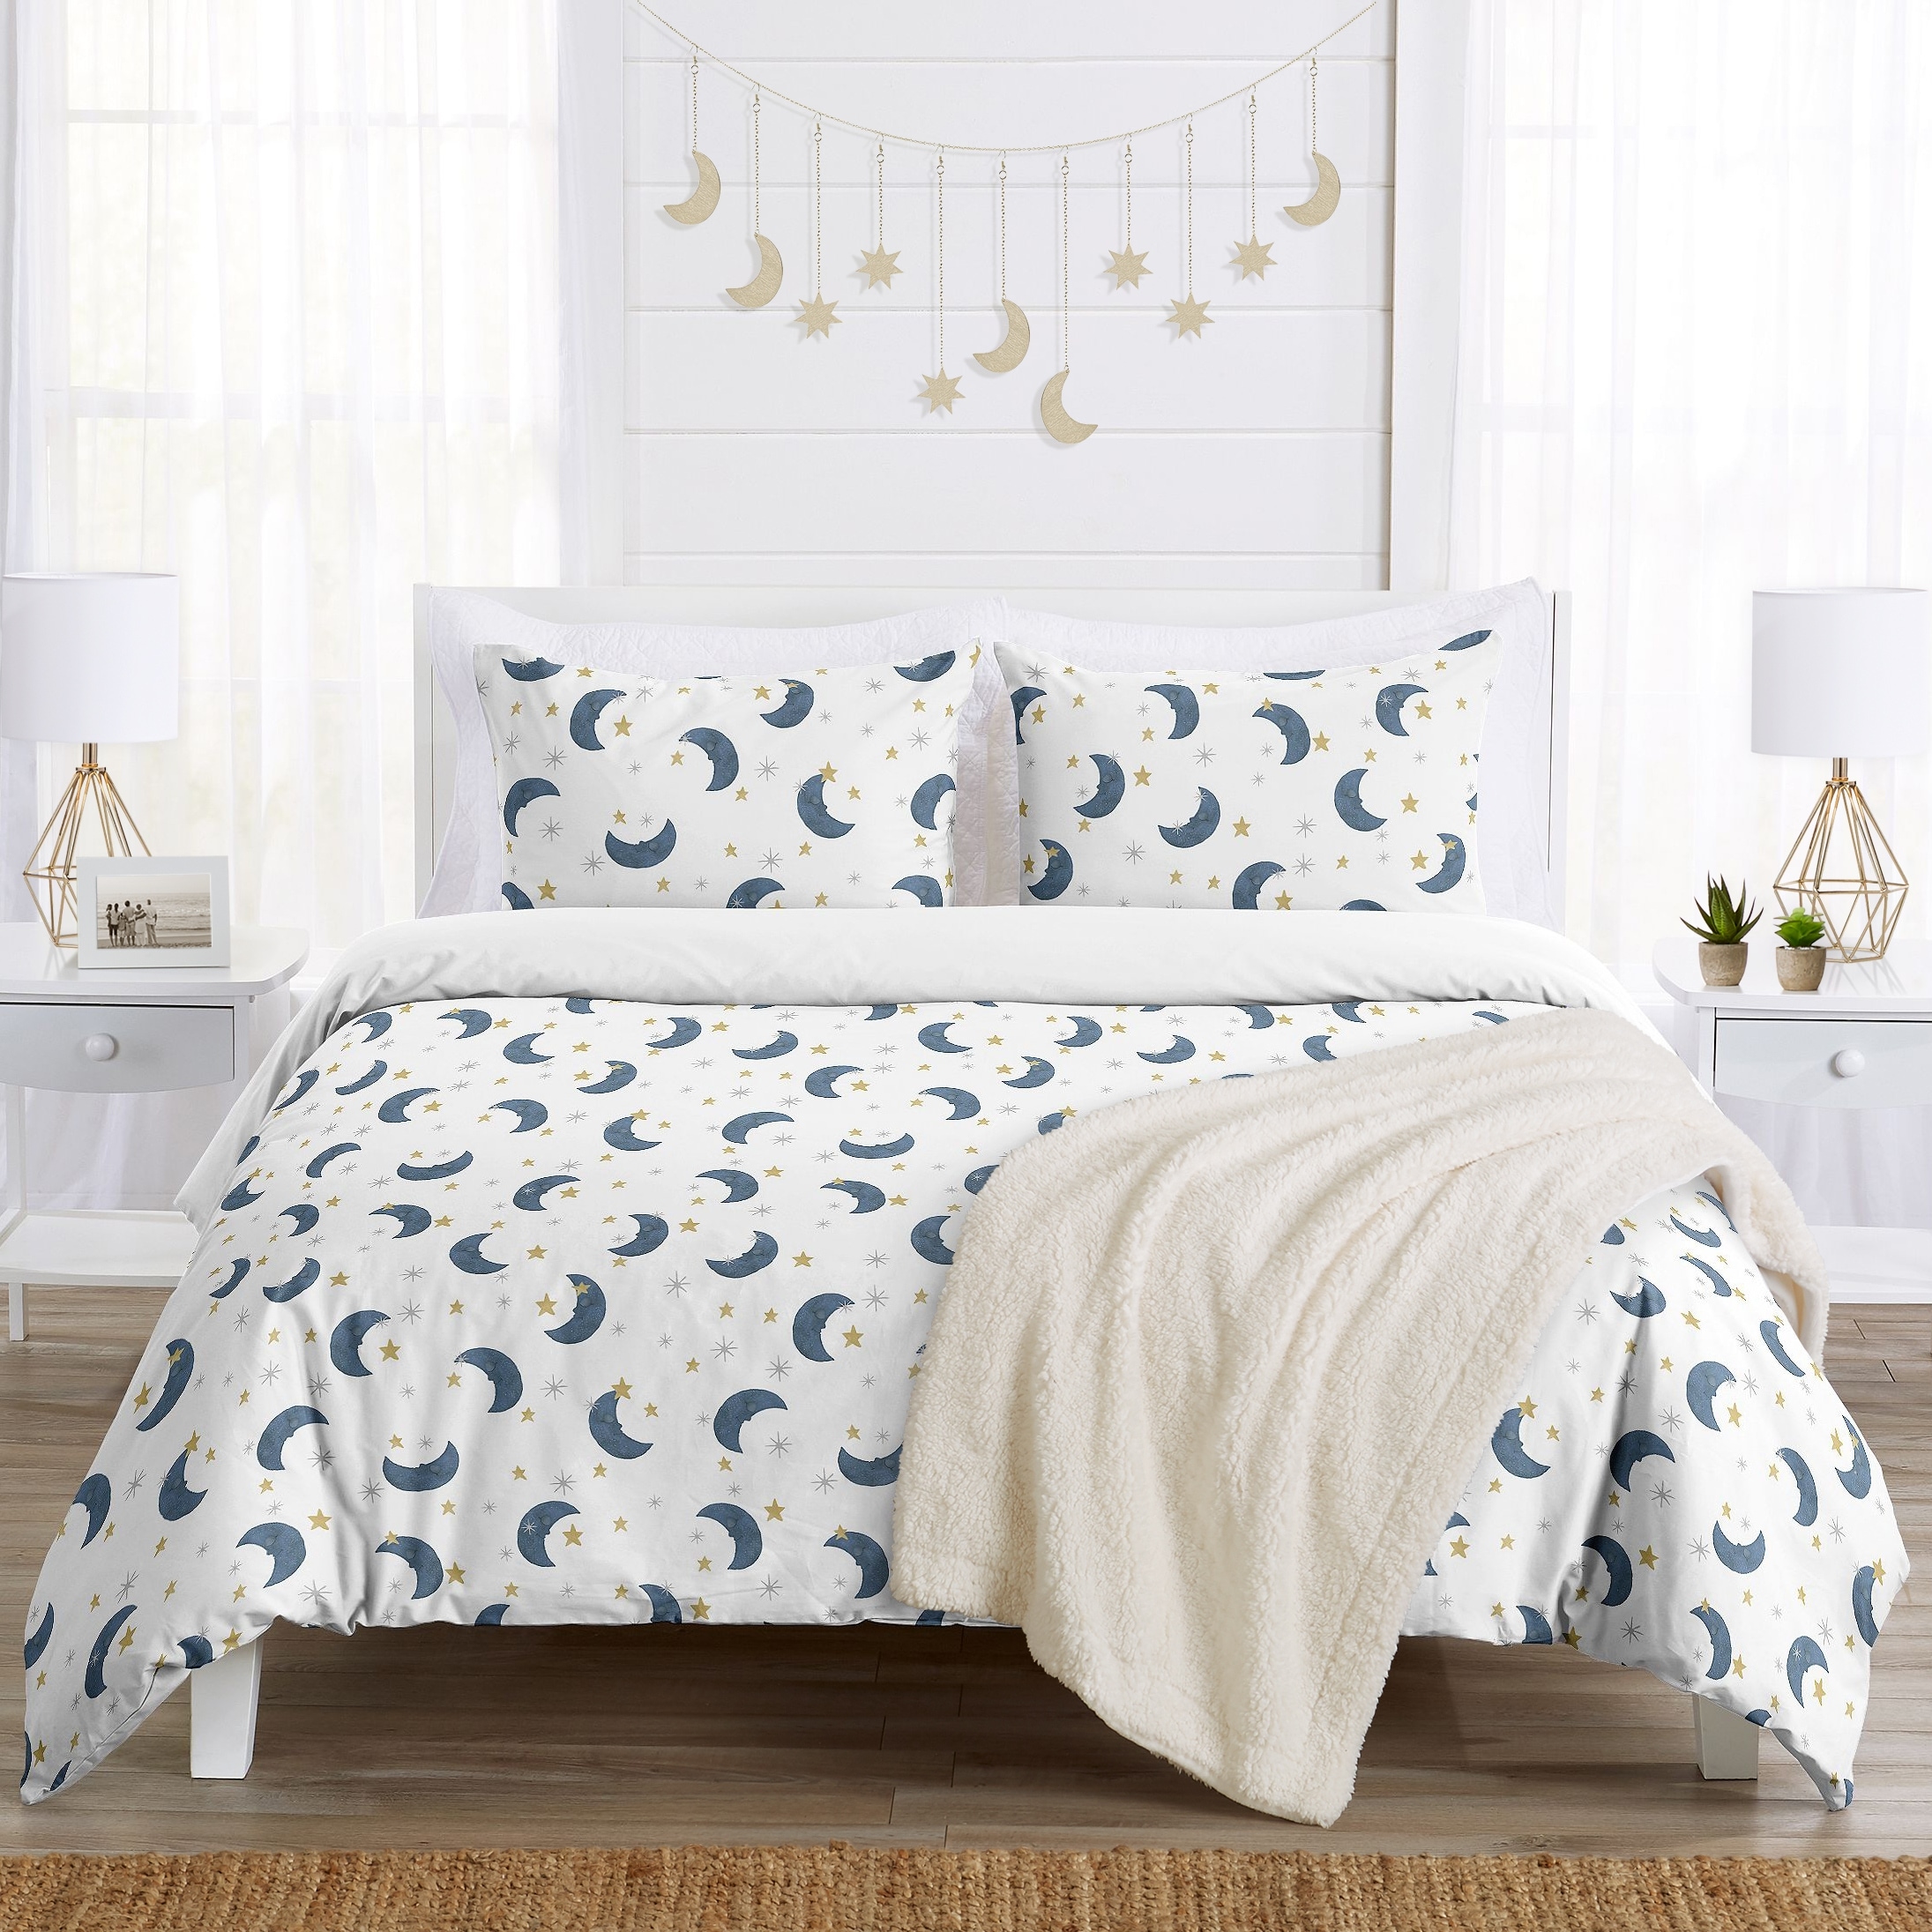 Moon and Star Collection Boy or Girl 3-pc Full Queen-size Comforter Set  Navy Blue Gold Watercolor Celestial Sky Gender Neutral Bed Bath  Beyond  34599949